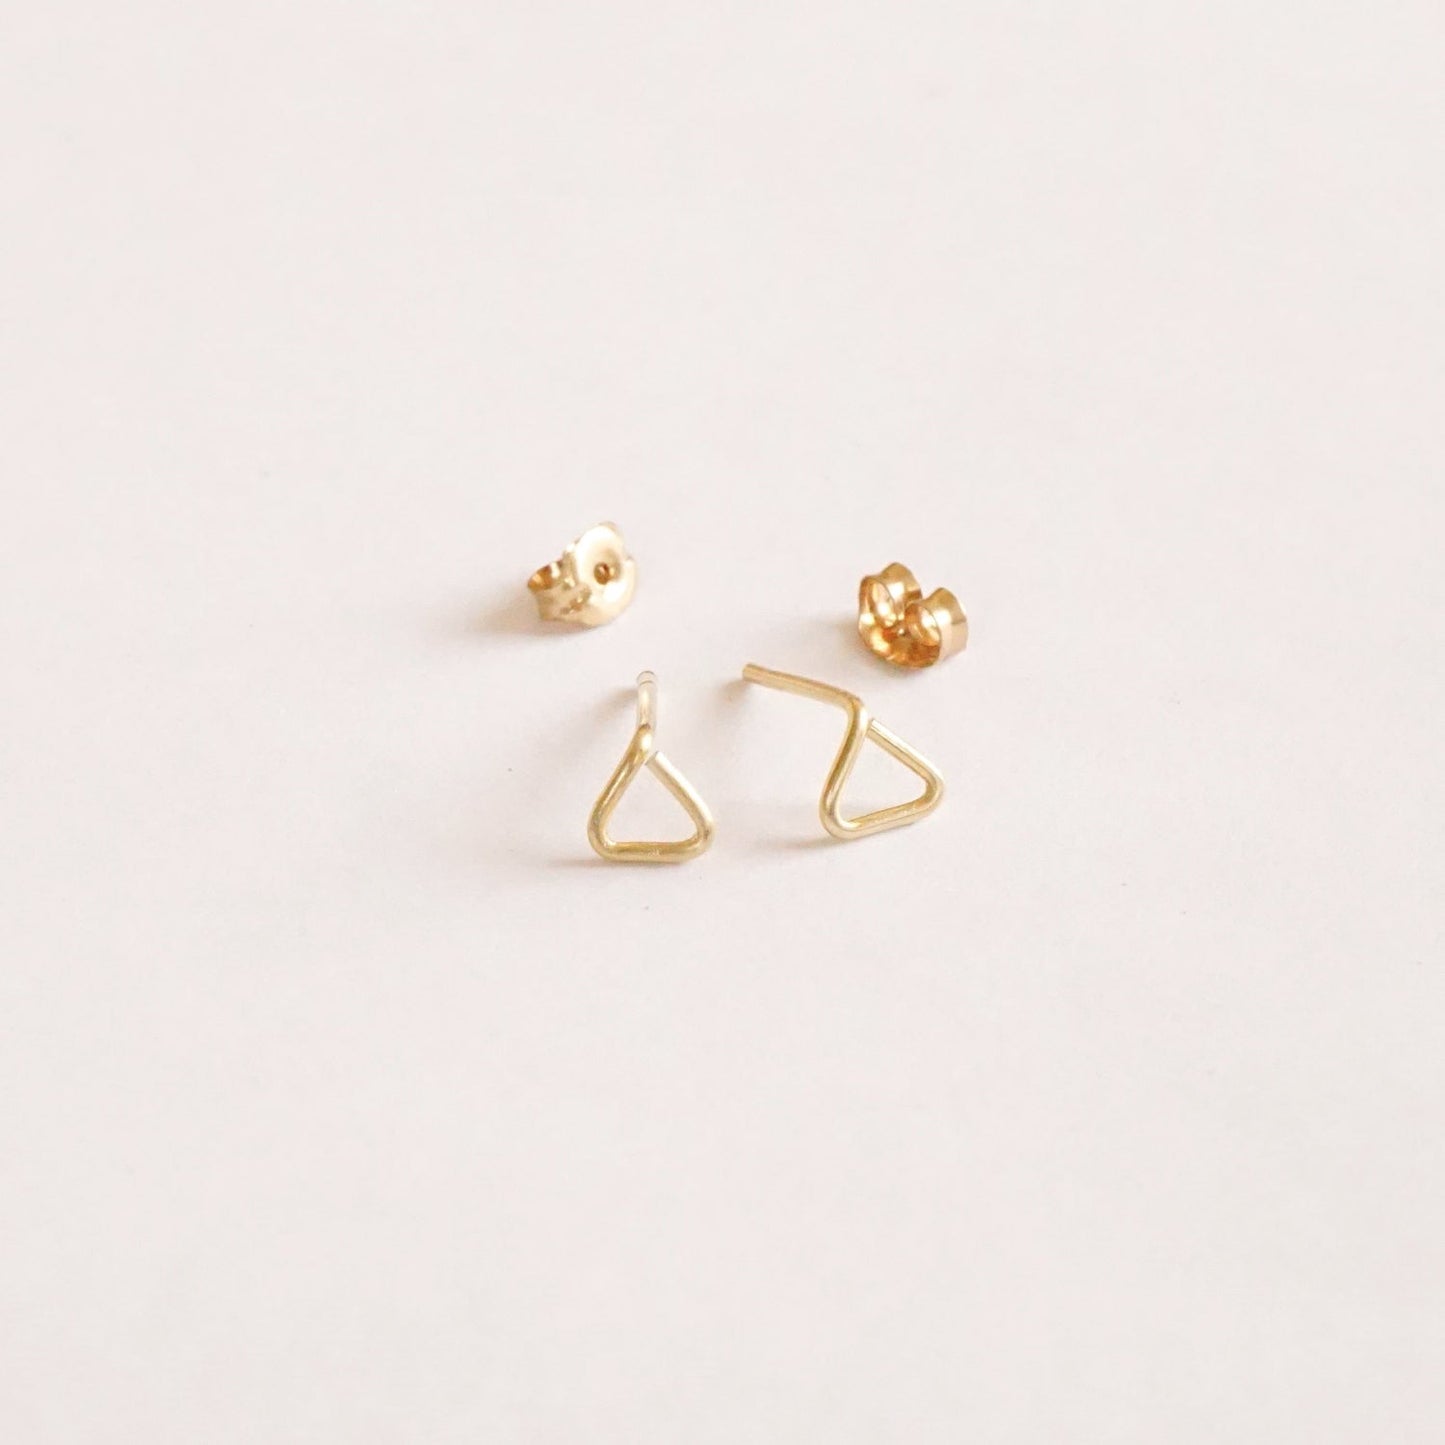 5mm Open Triangle Stud Earrings 015 - Patination Design